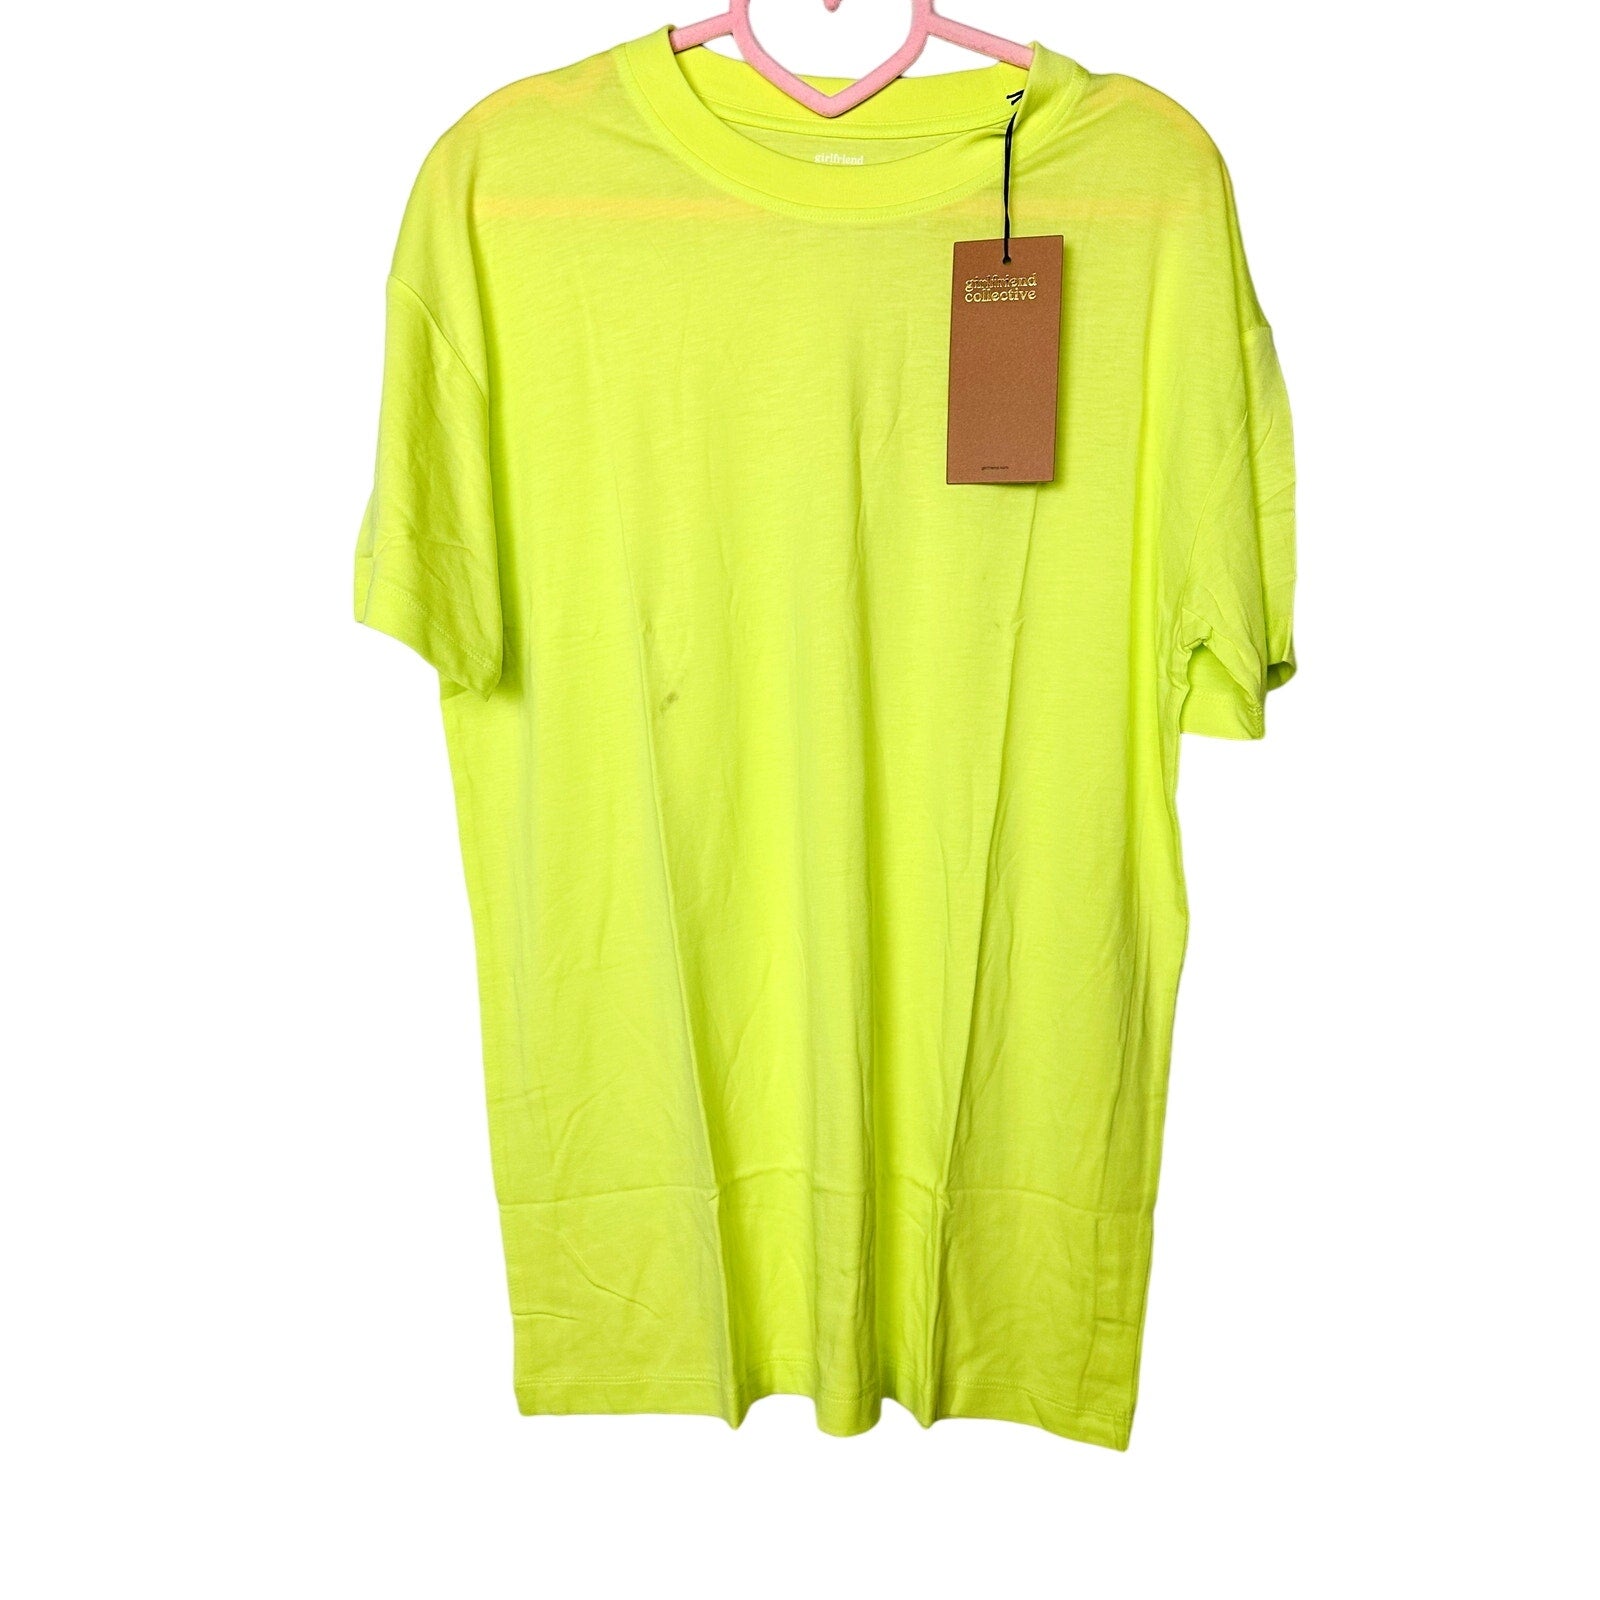 Girlfriend Collective NWT Unisex Crewneck T-Shirt Top Electric Lime Size 3